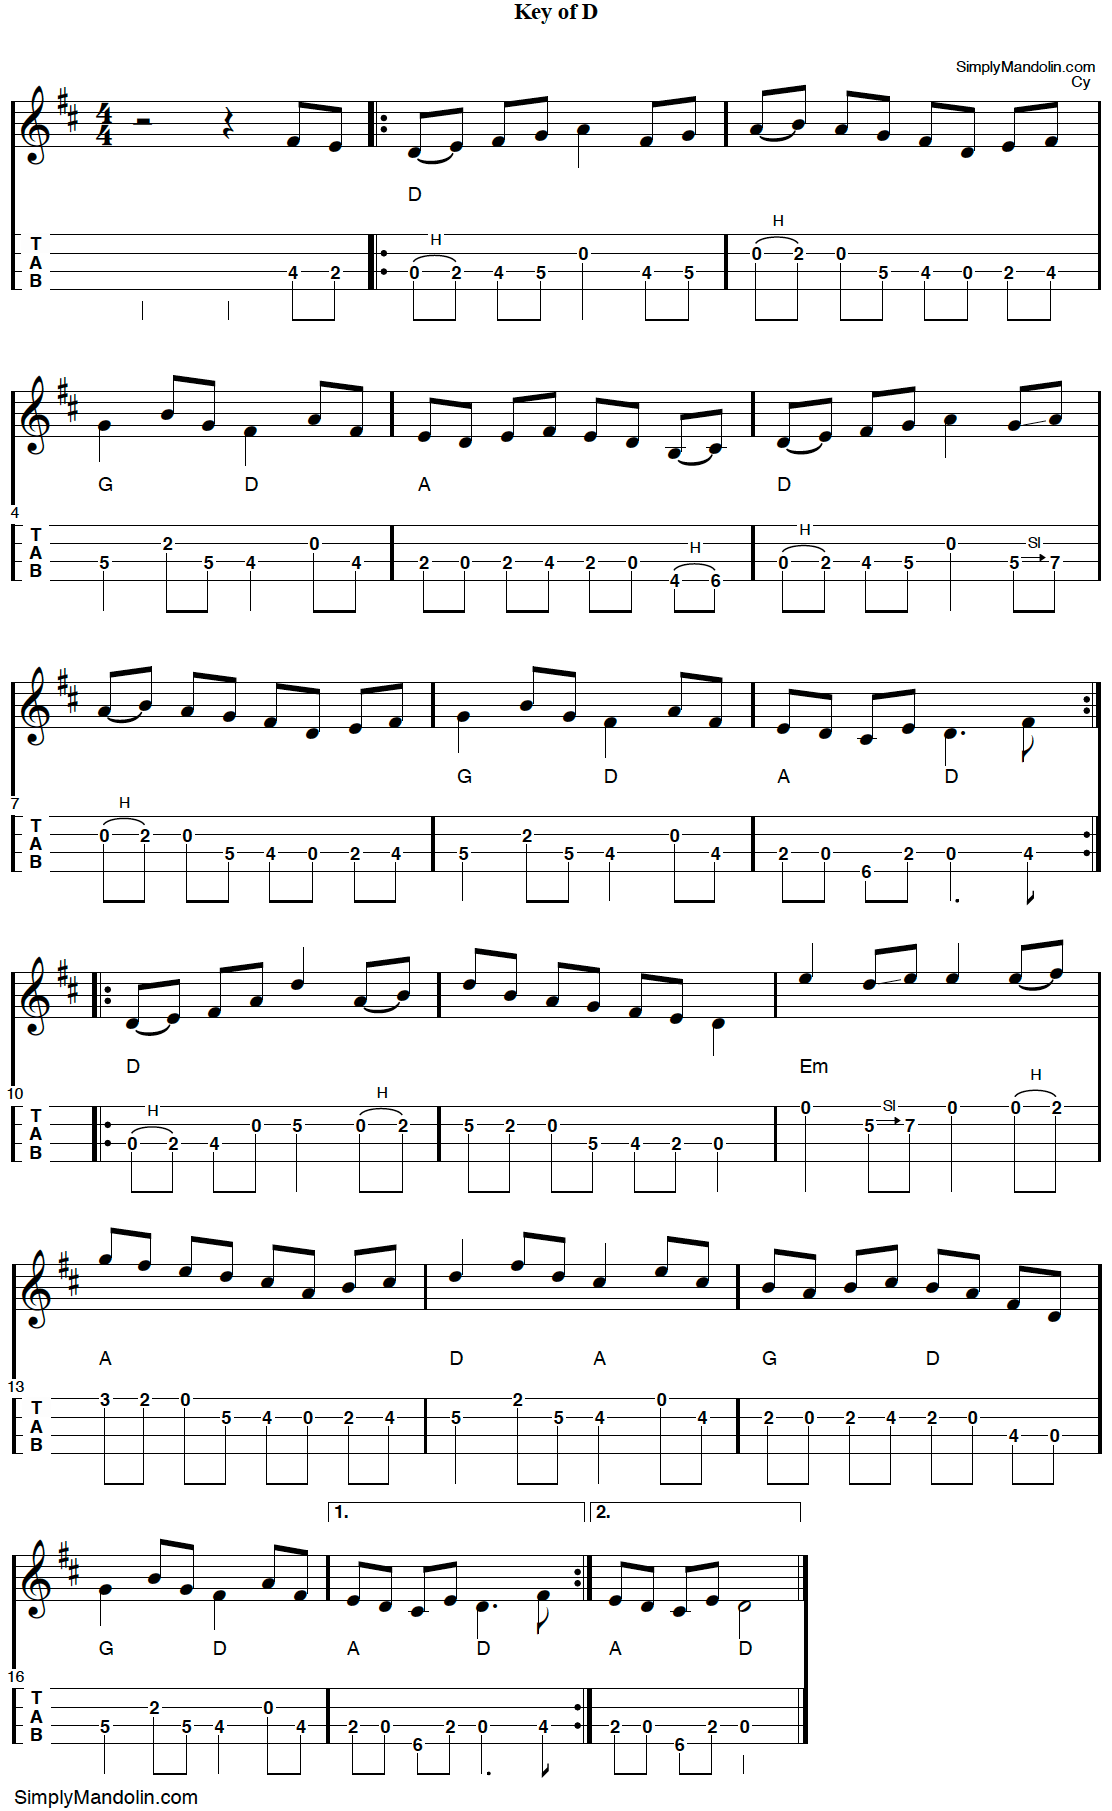 Image of music and tab for "whiskey before breakfast".